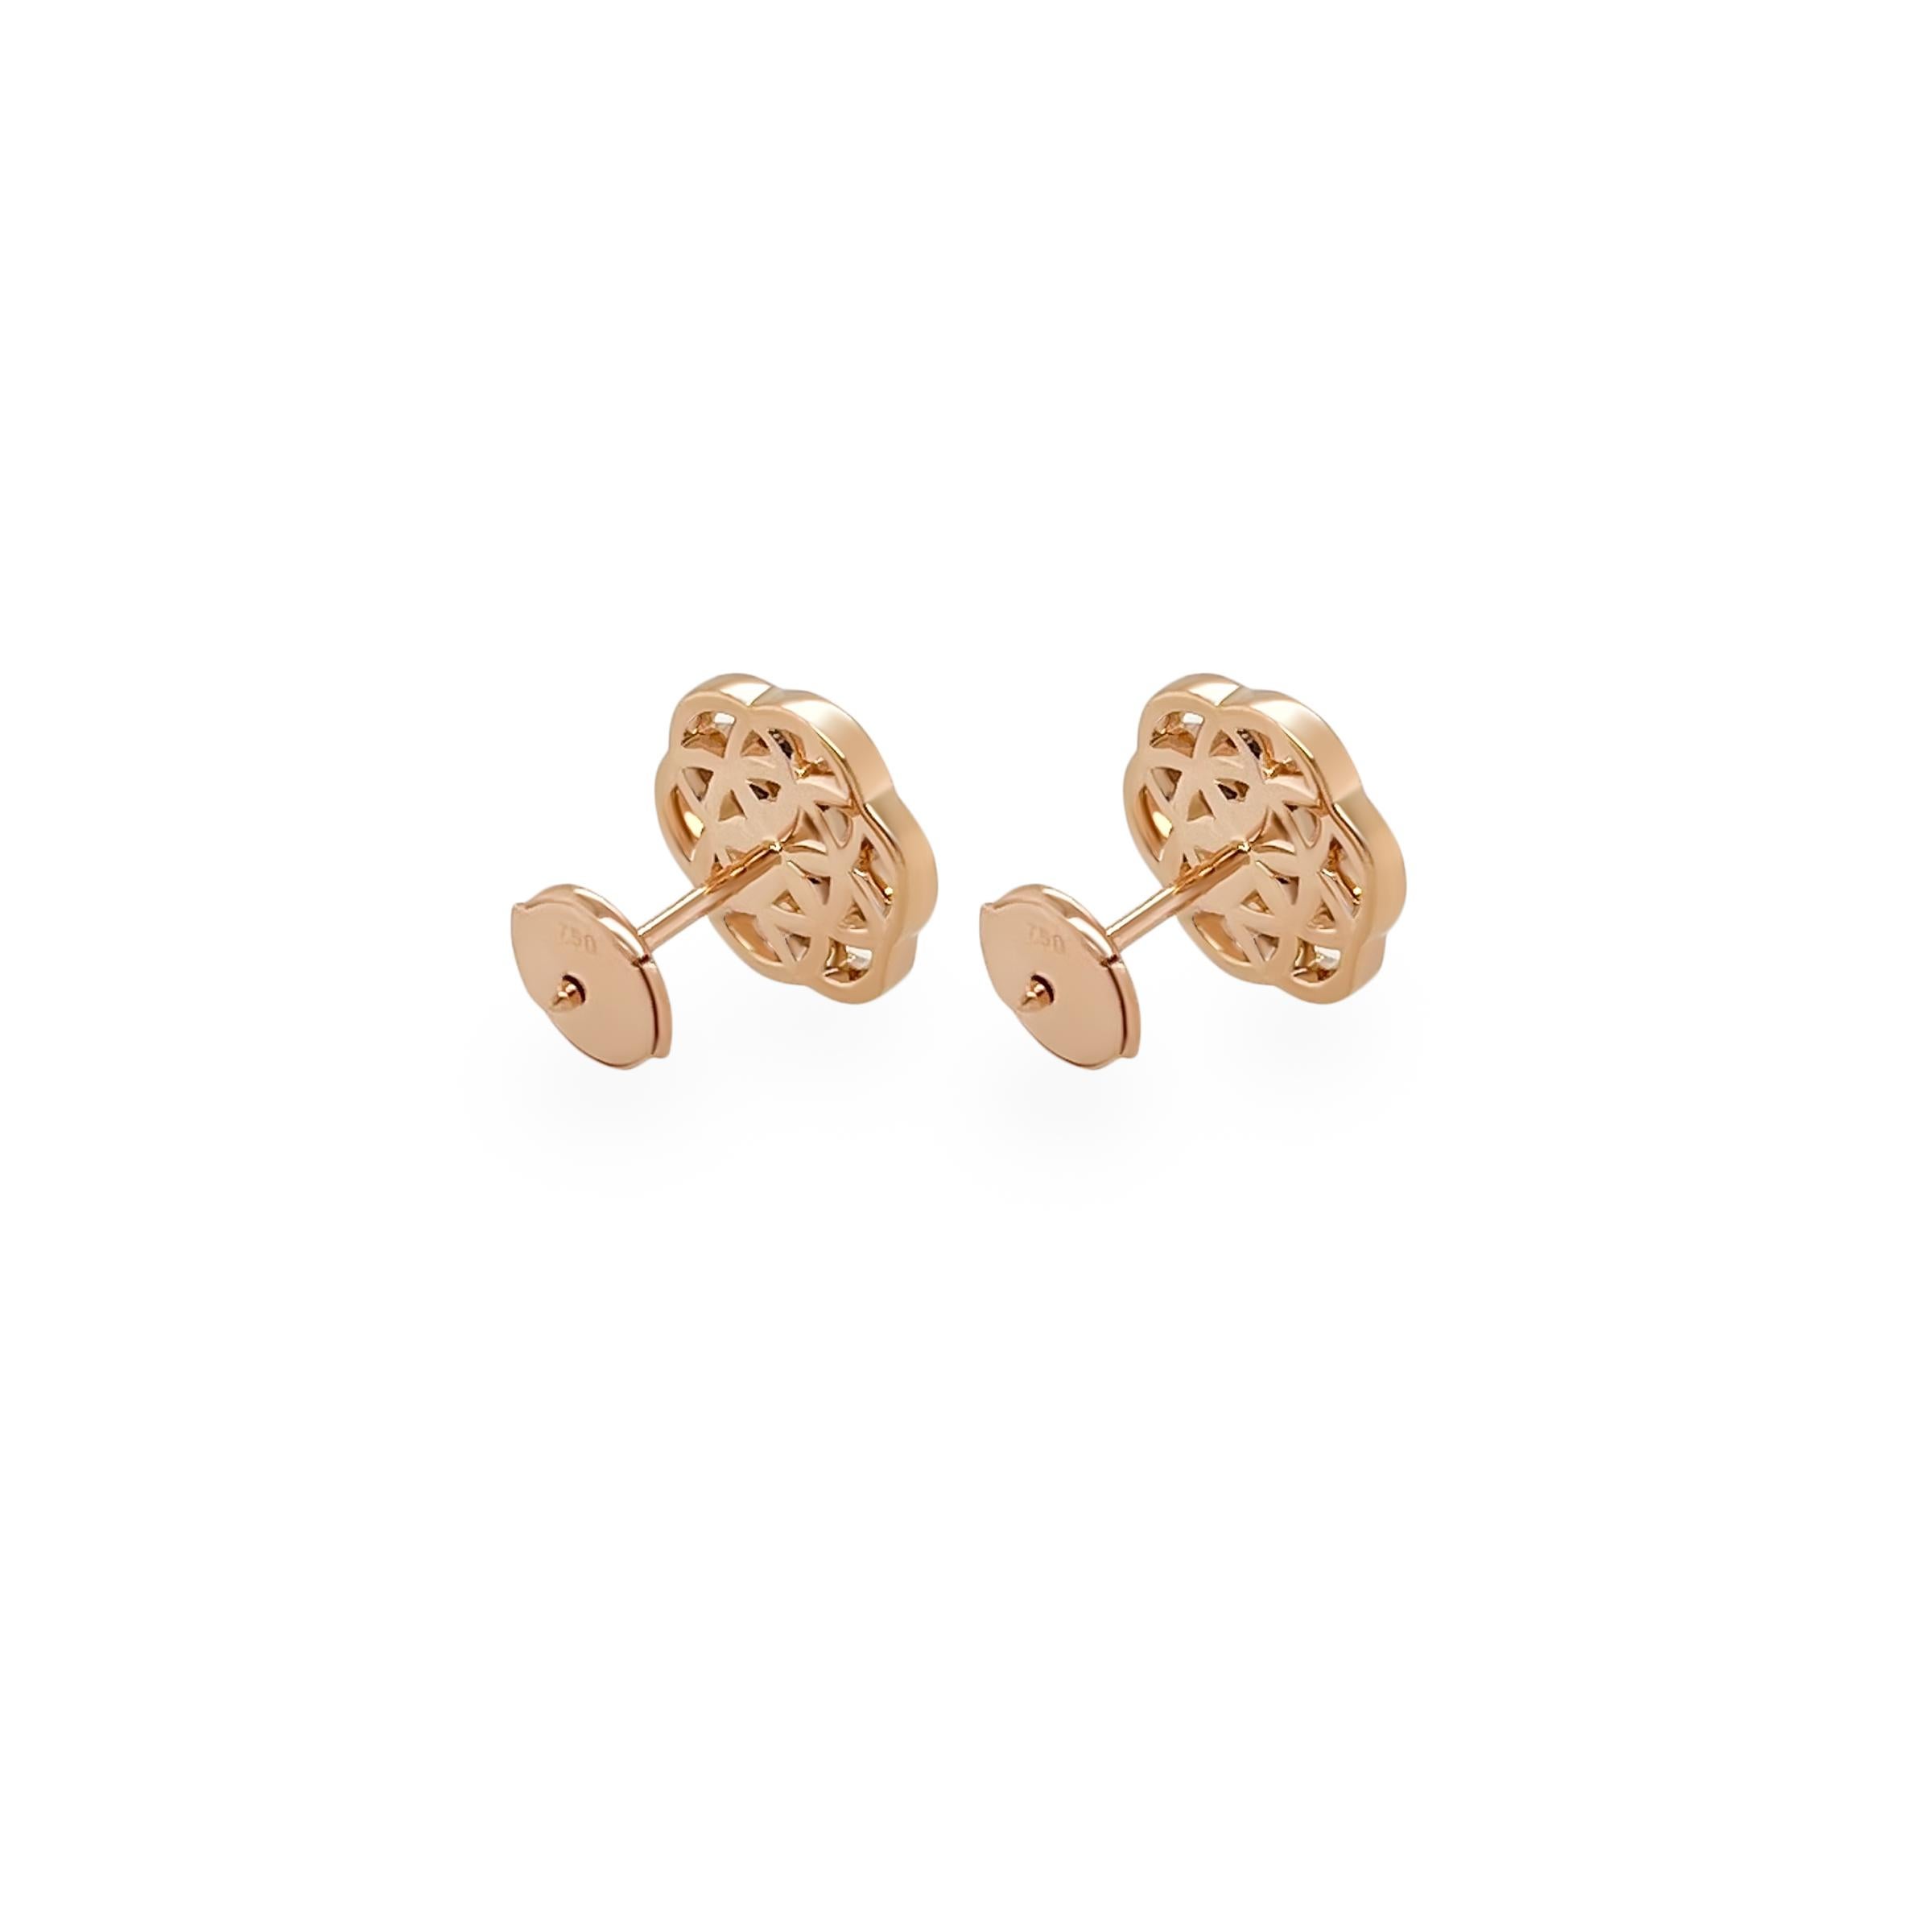 Our Flower of Life Earrings are expertly crafted from shimmering 18k rose gold and high quality diamonds. This intricate design captures the essence of interconnectedness and is a symbol of harmony for all living things with micro pave'd diamonds.